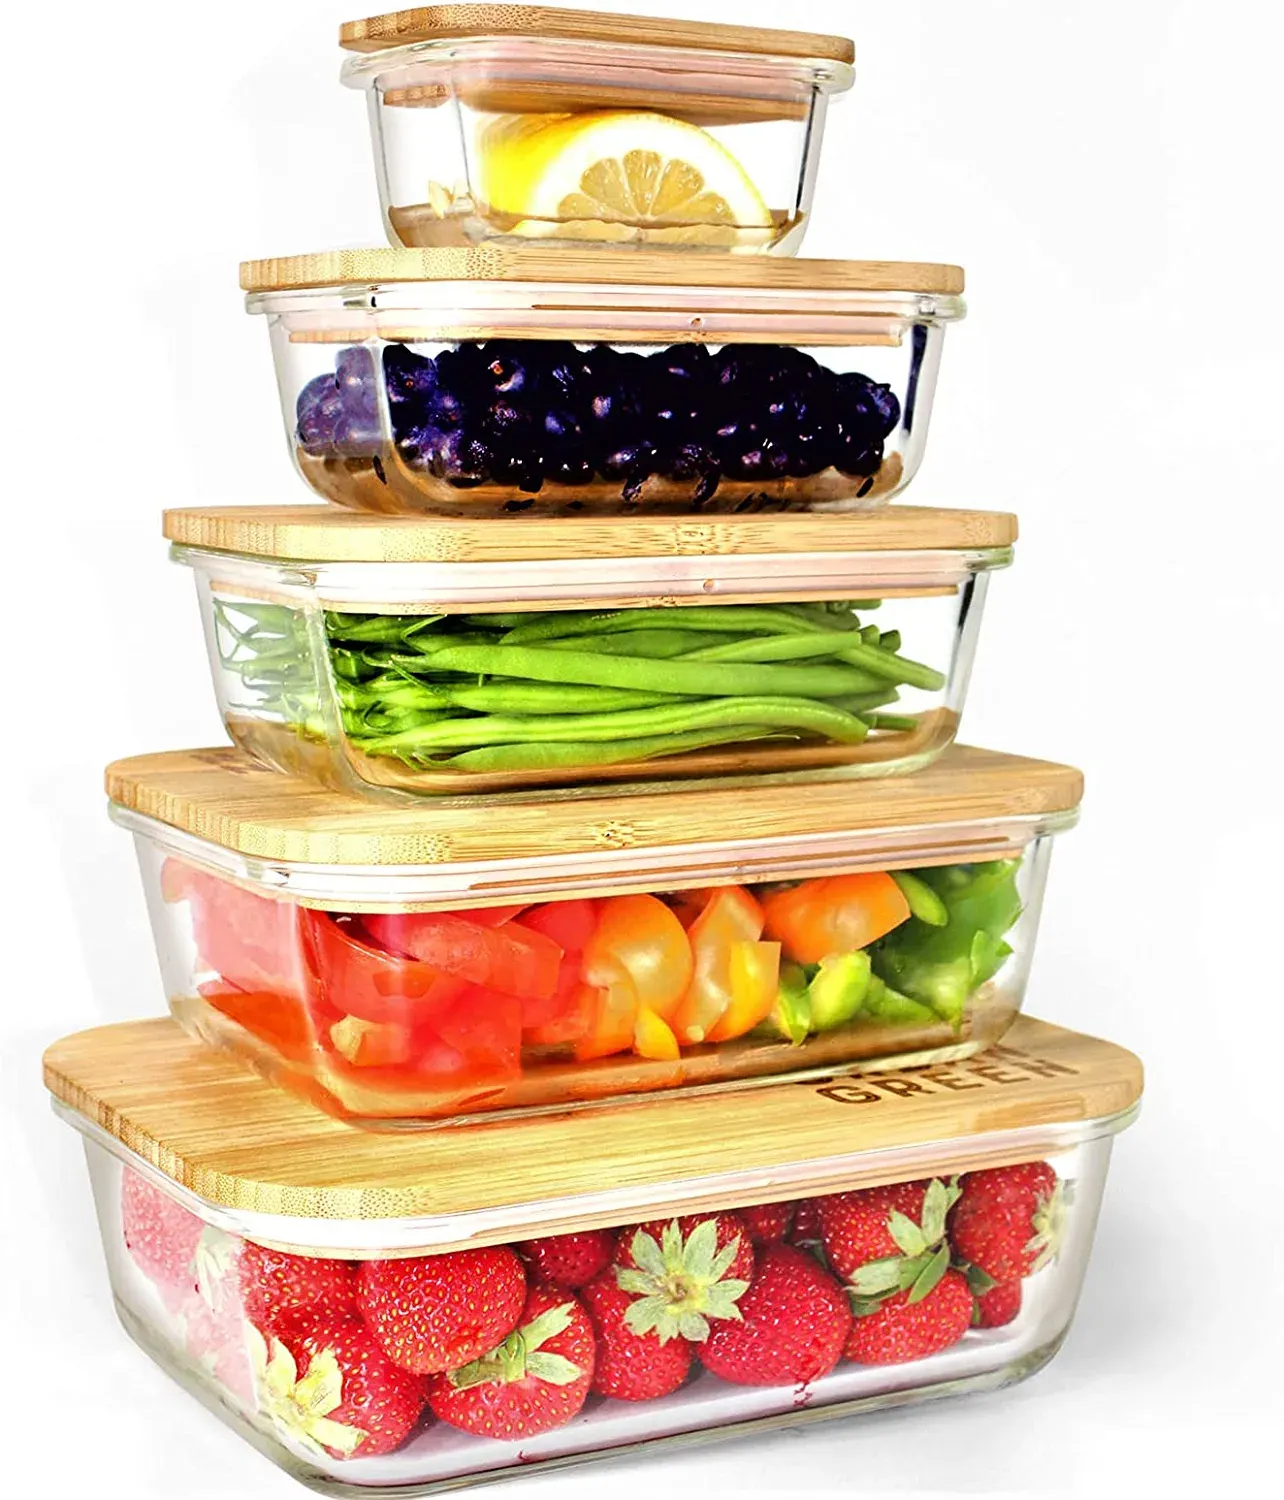 https://cdn.apartmenttherapy.info/image/upload/v1671575080/gen-workflow/product-database/Urban_Green_Glass_Food_Storage_Containers_review.webp